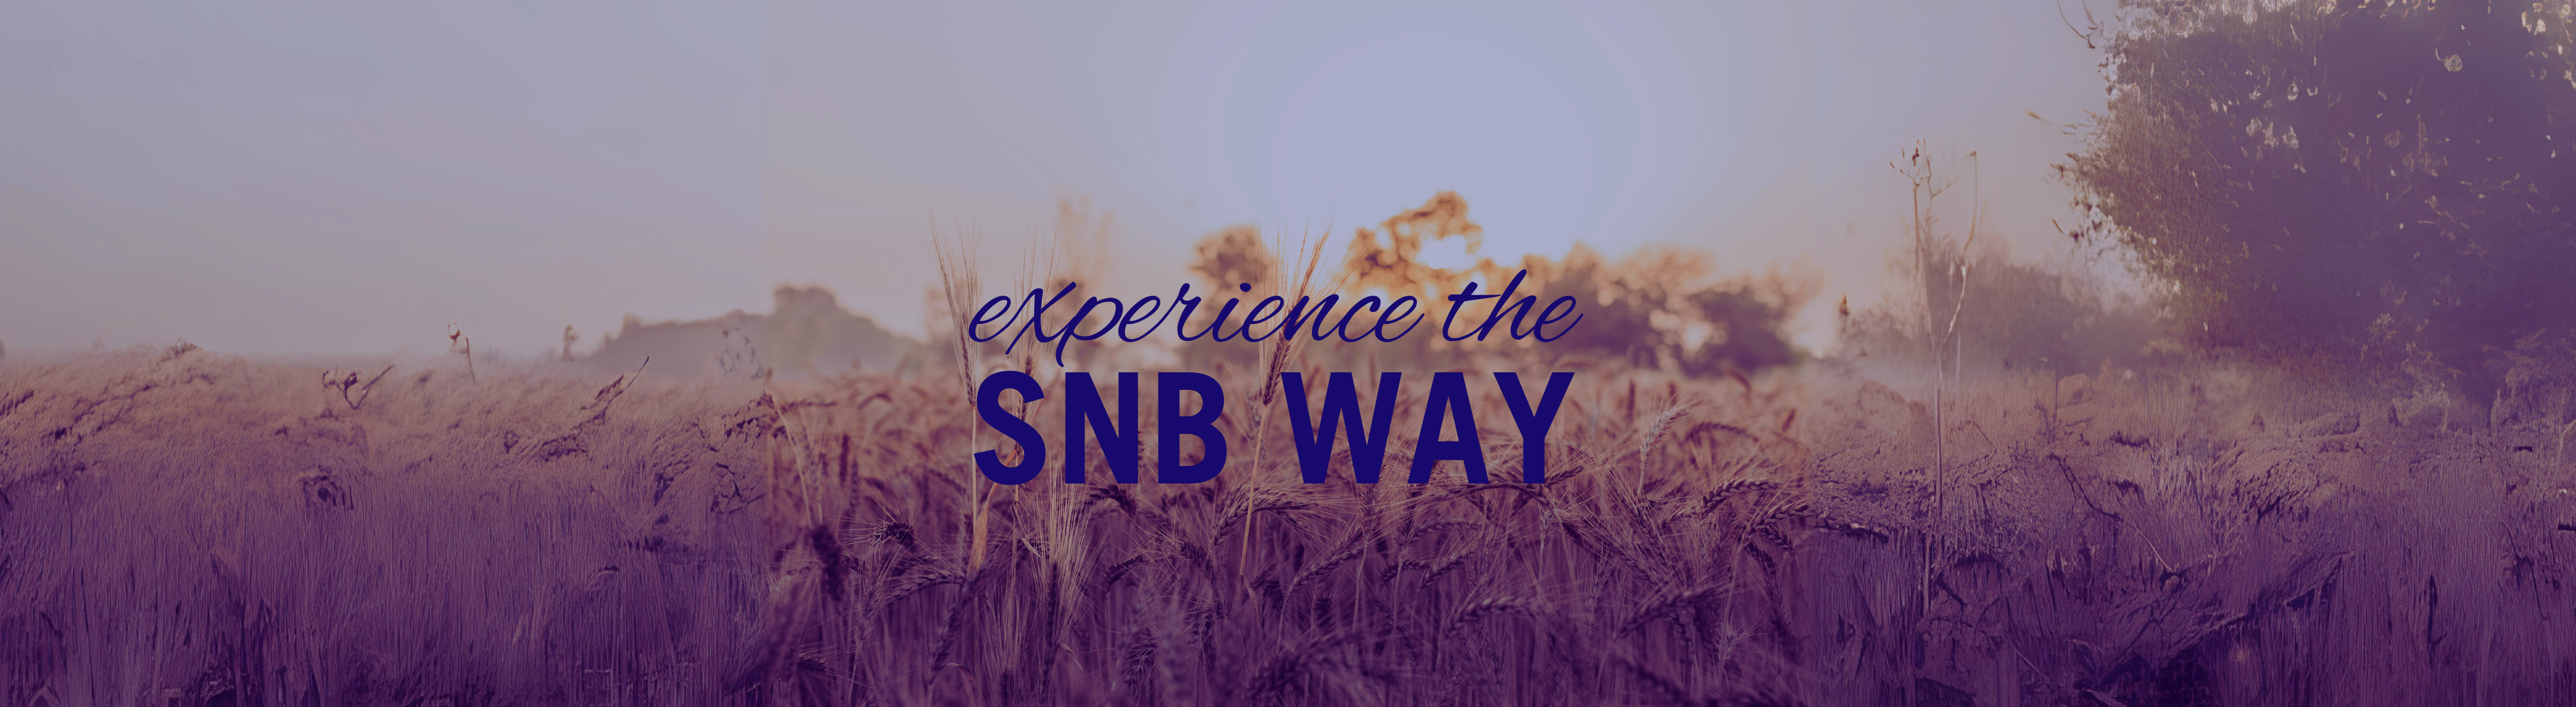 experience the snb way